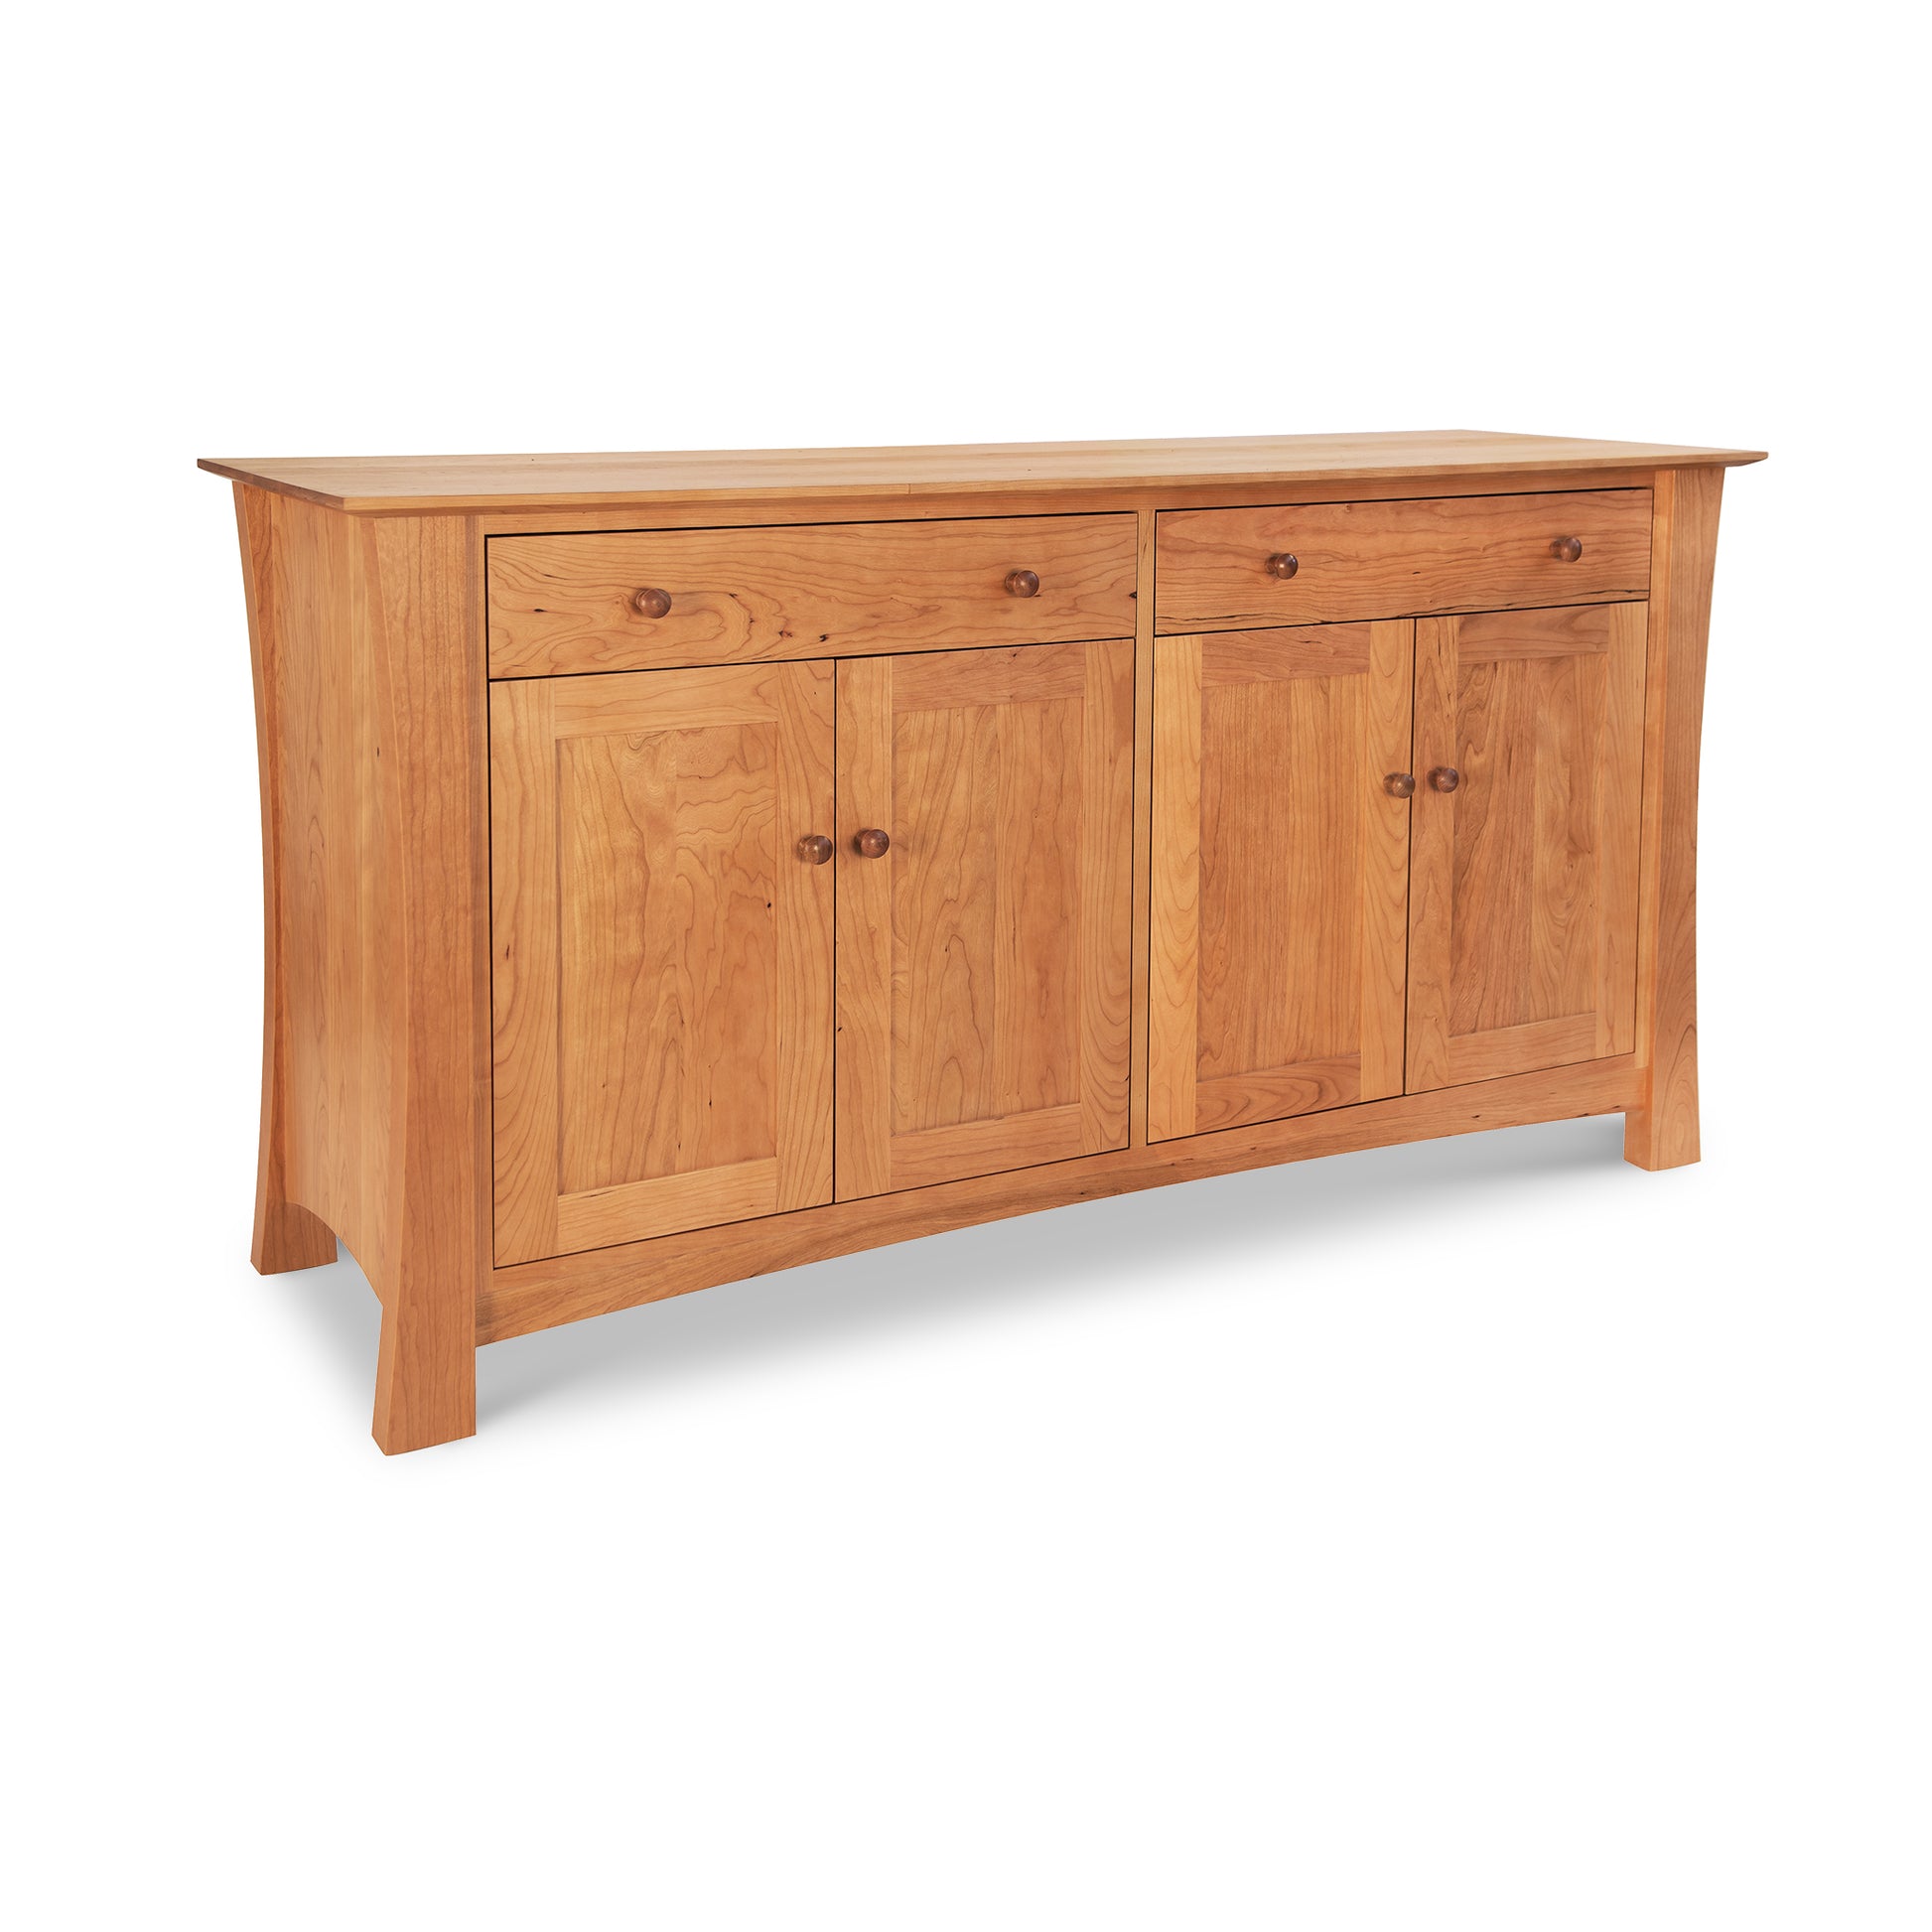 The Lyndon Furniture Andrews Buffet is a modern feel wooden sideboard that seamlessly combines functionality with style. Featuring doors and drawers, it is an ideal addition for a contemporary kitchen design.